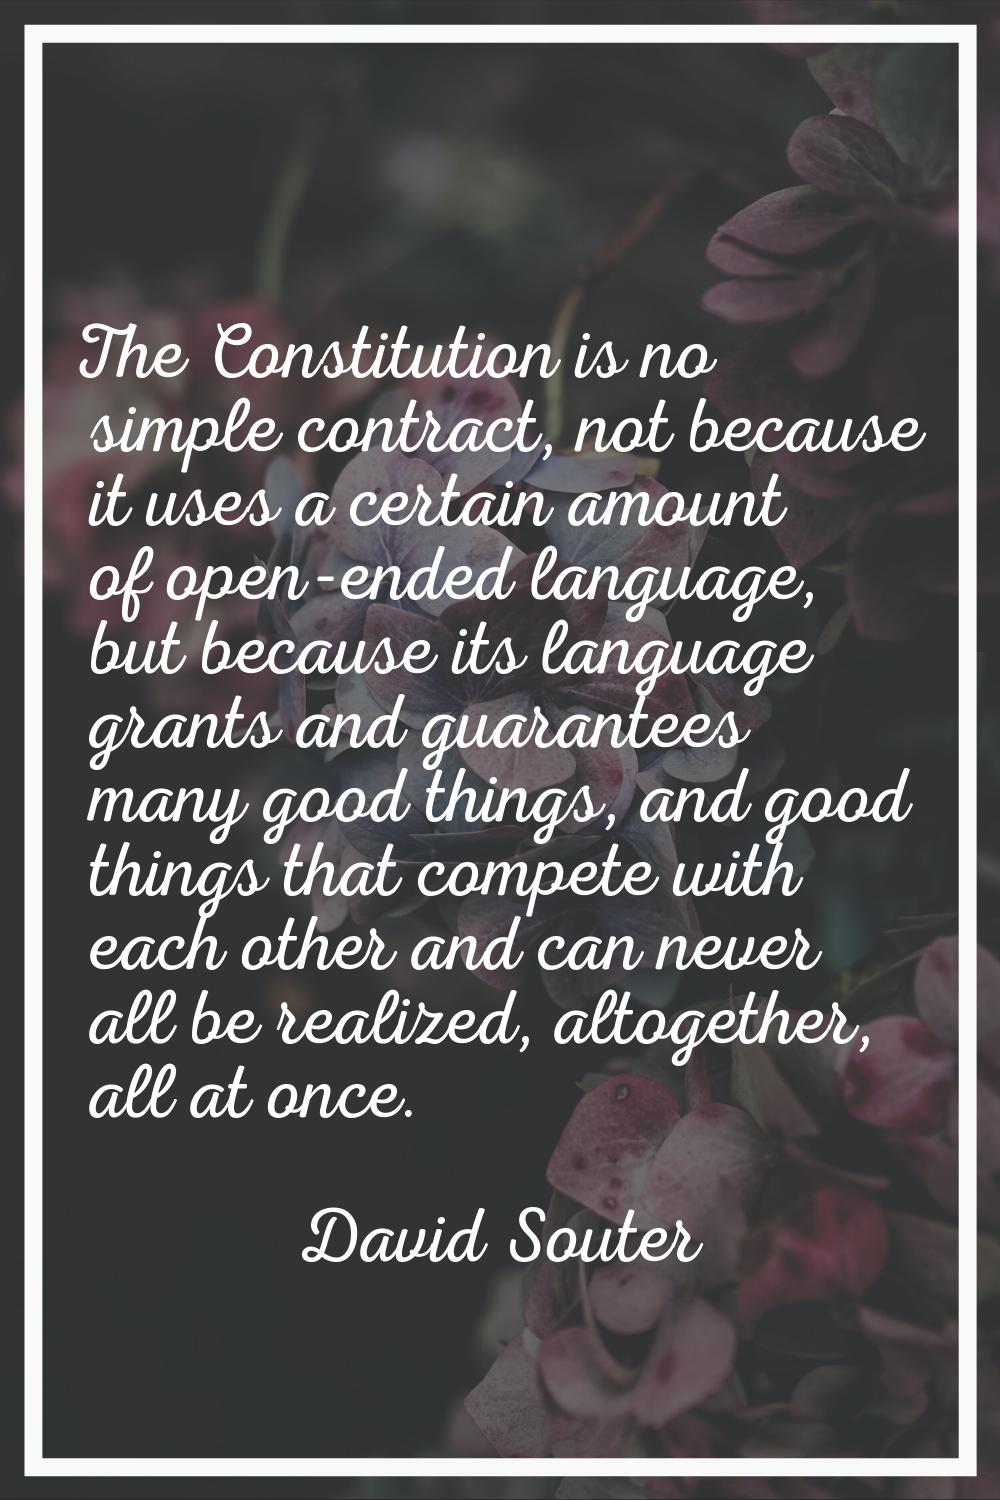 The Constitution is no simple contract, not because it uses a certain amount of open-ended language